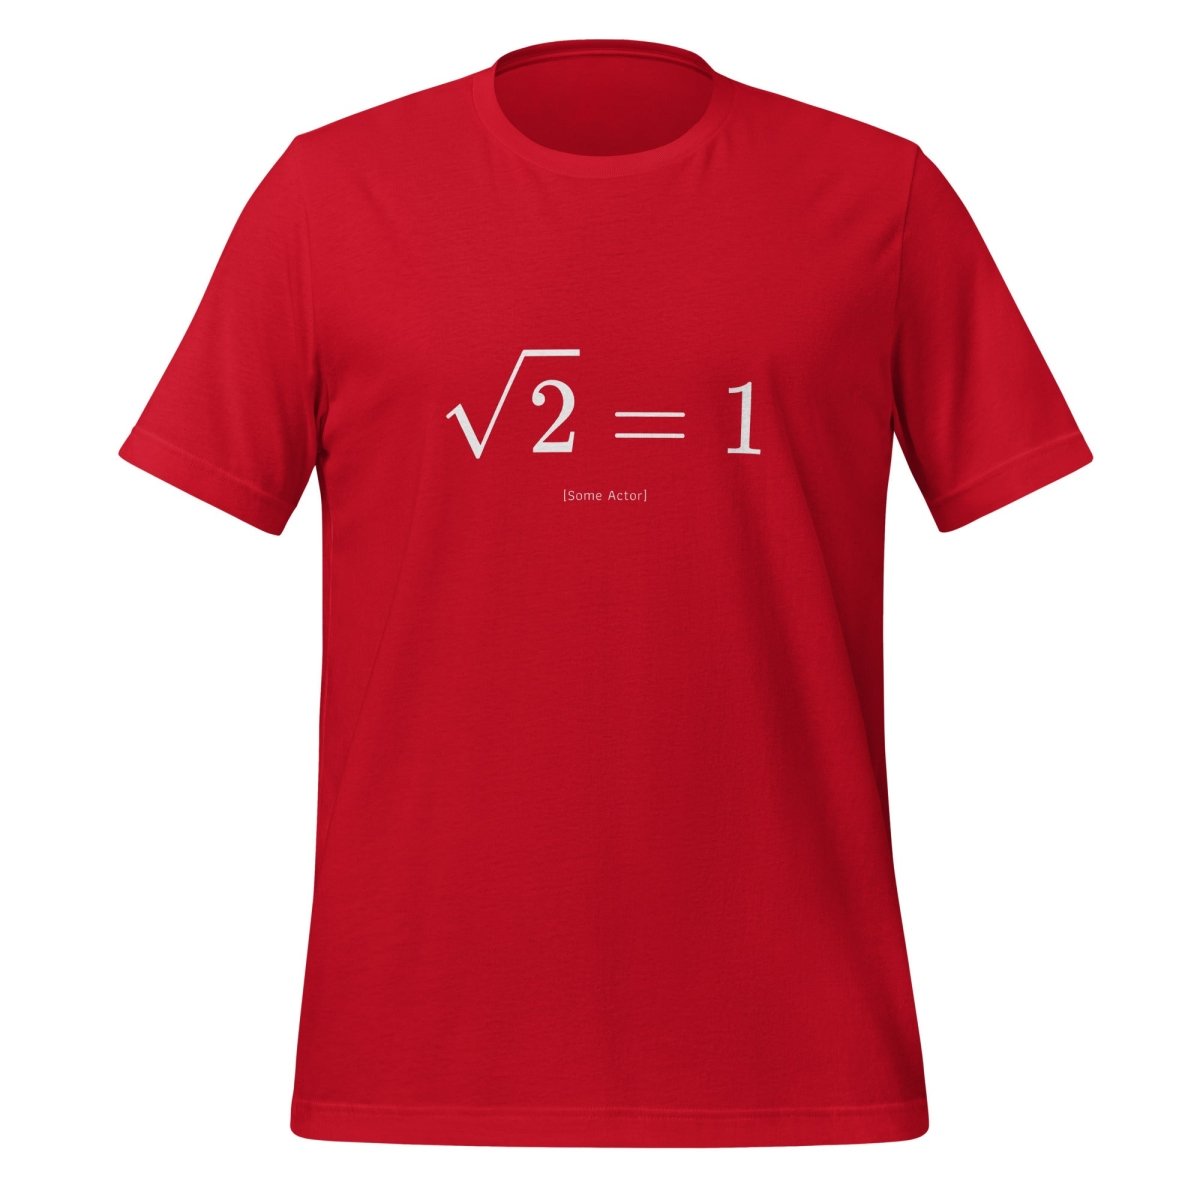 The Square Root of 2 Equals 1 T - Shirt (unisex) - Red - AI Store